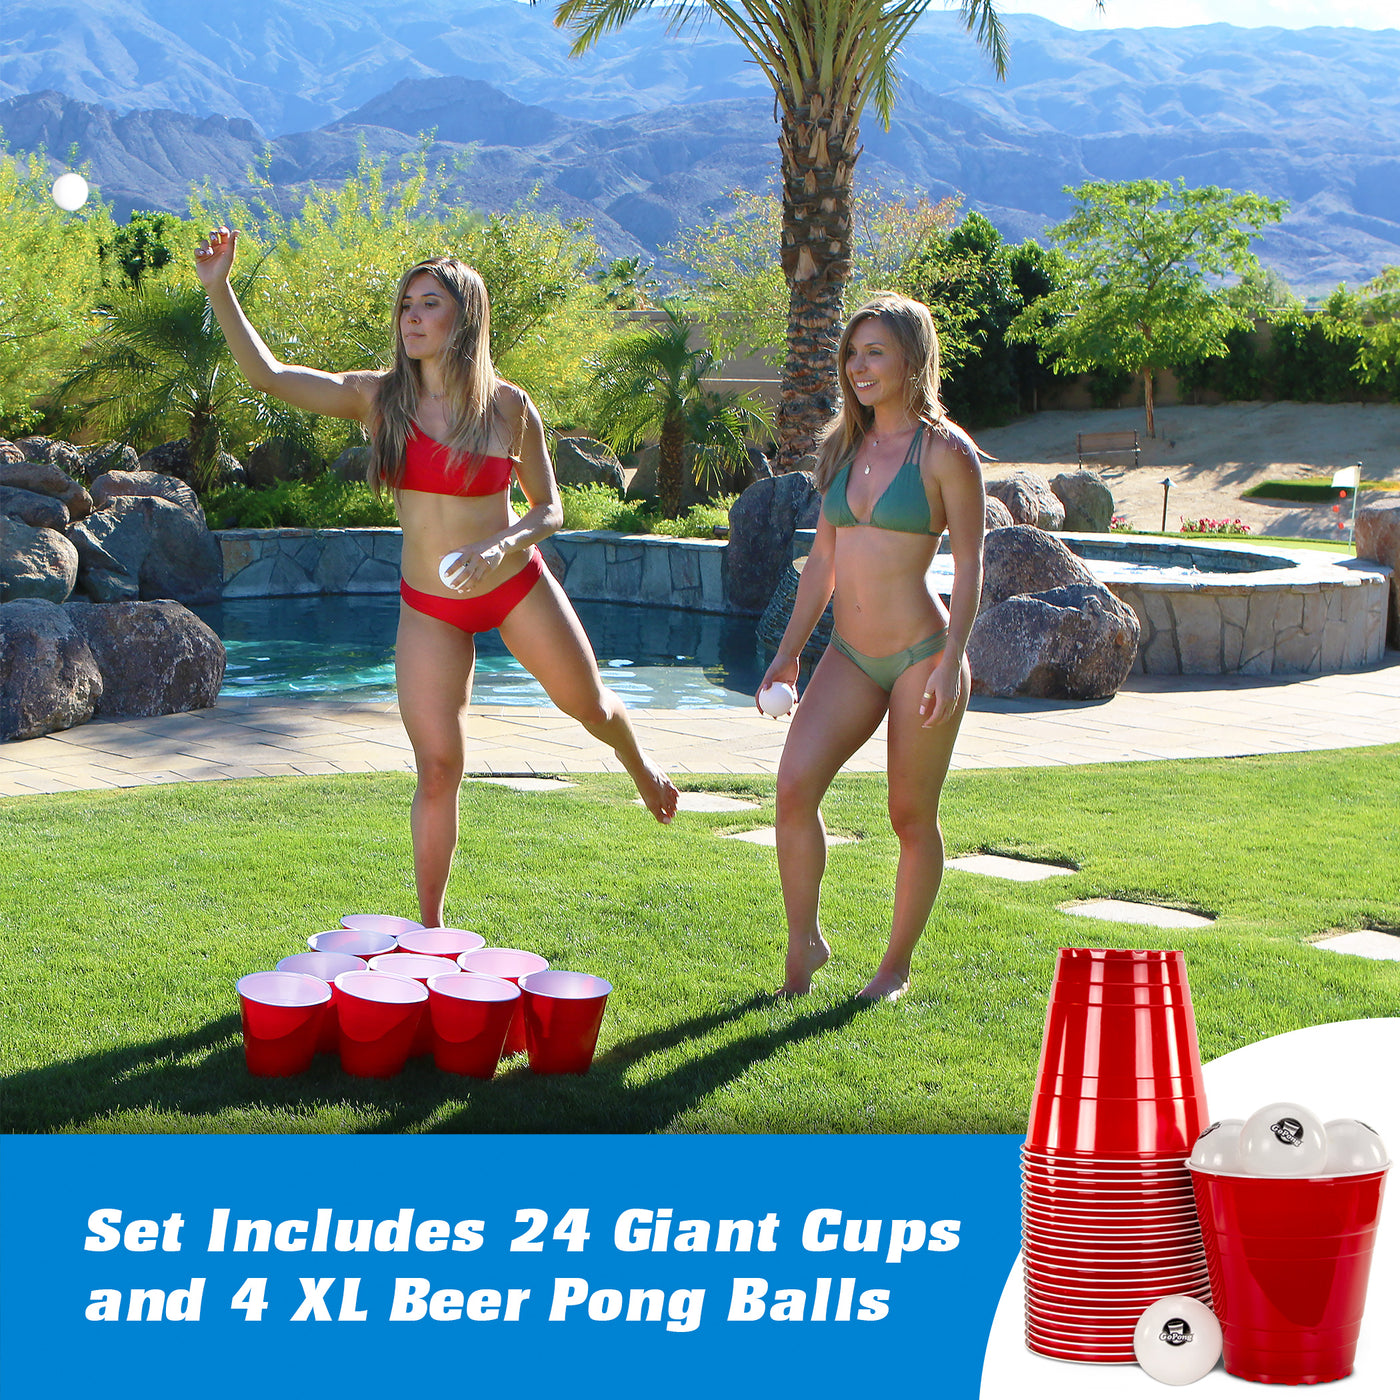 GoPong 6oz Red Party Cups - 160-Pack